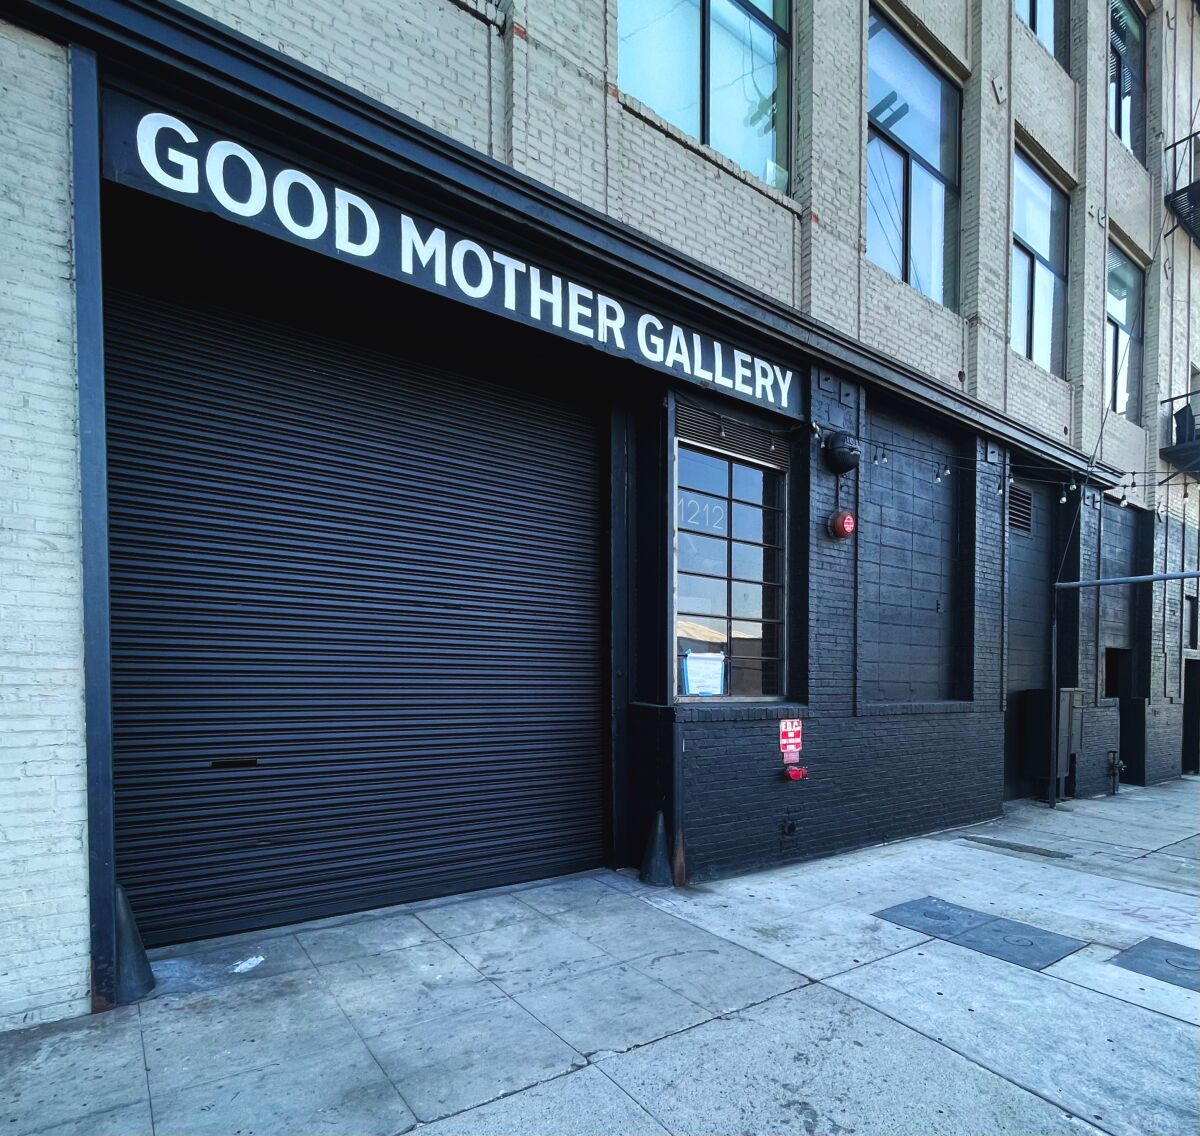 The building's exterior is titled Good Mother Gallery